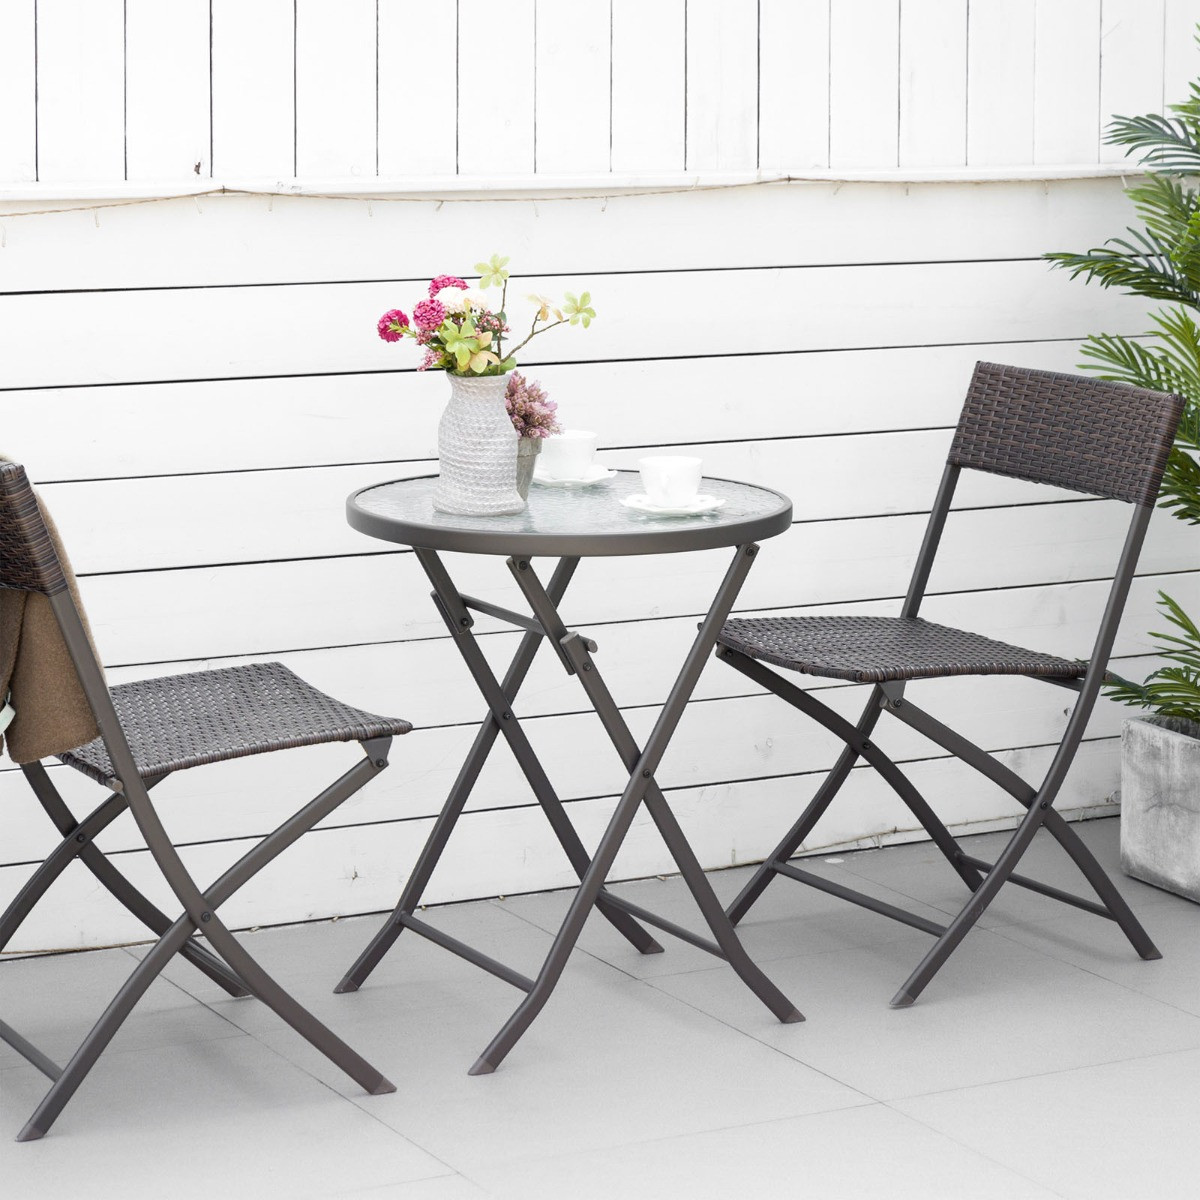 Outsunny Rattan Wicker Bistro Table And Chair Set, Brown - 3 Piece>